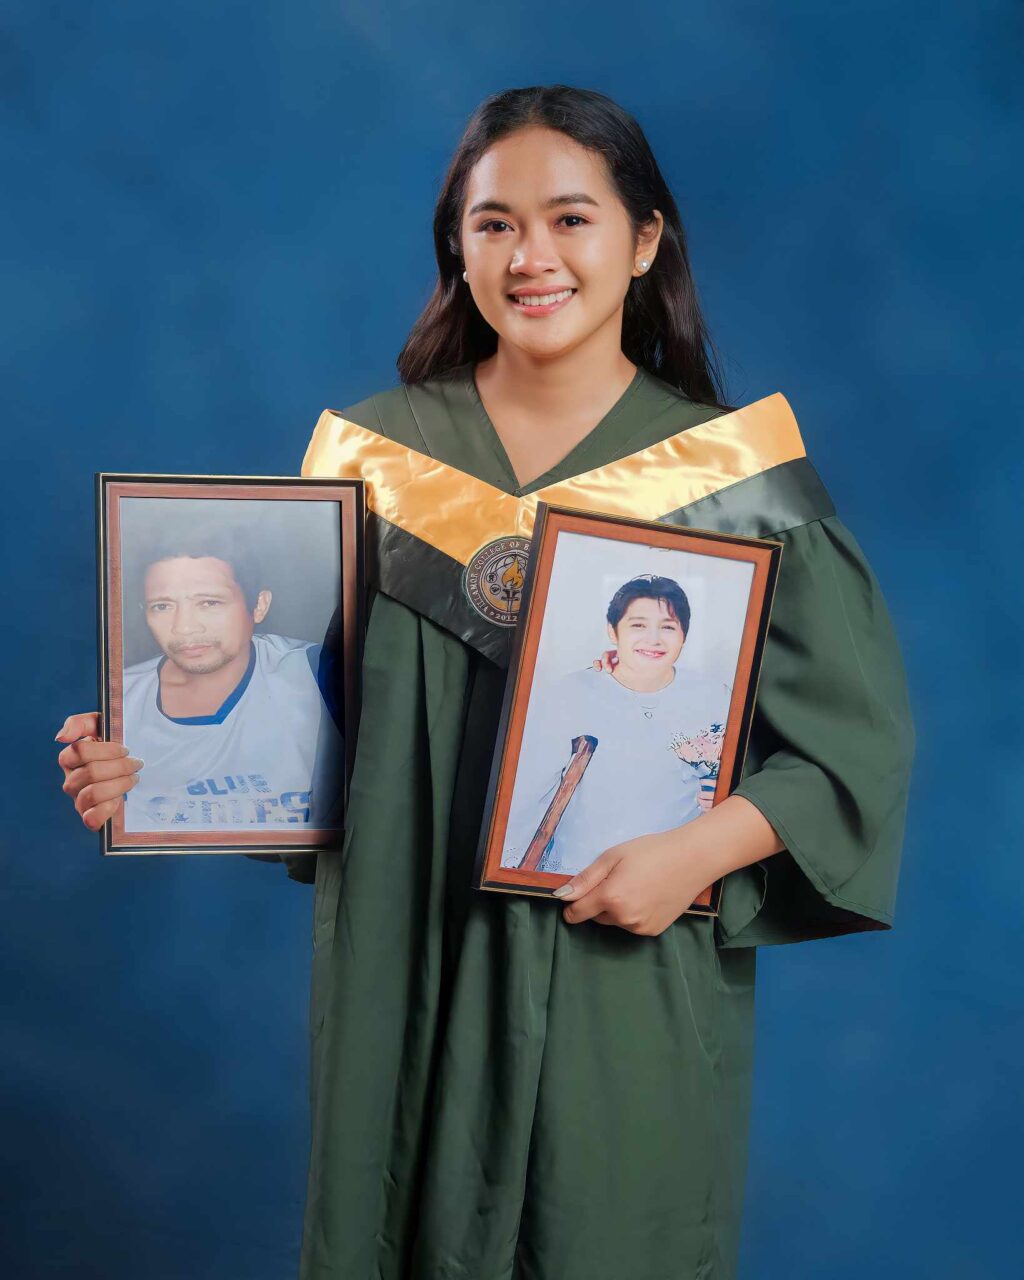 Student shows how she shared graduation pictorial moment with late parents. Graduation pictorial photo of Margot Claire Araña holding the framed photos of her late parents.